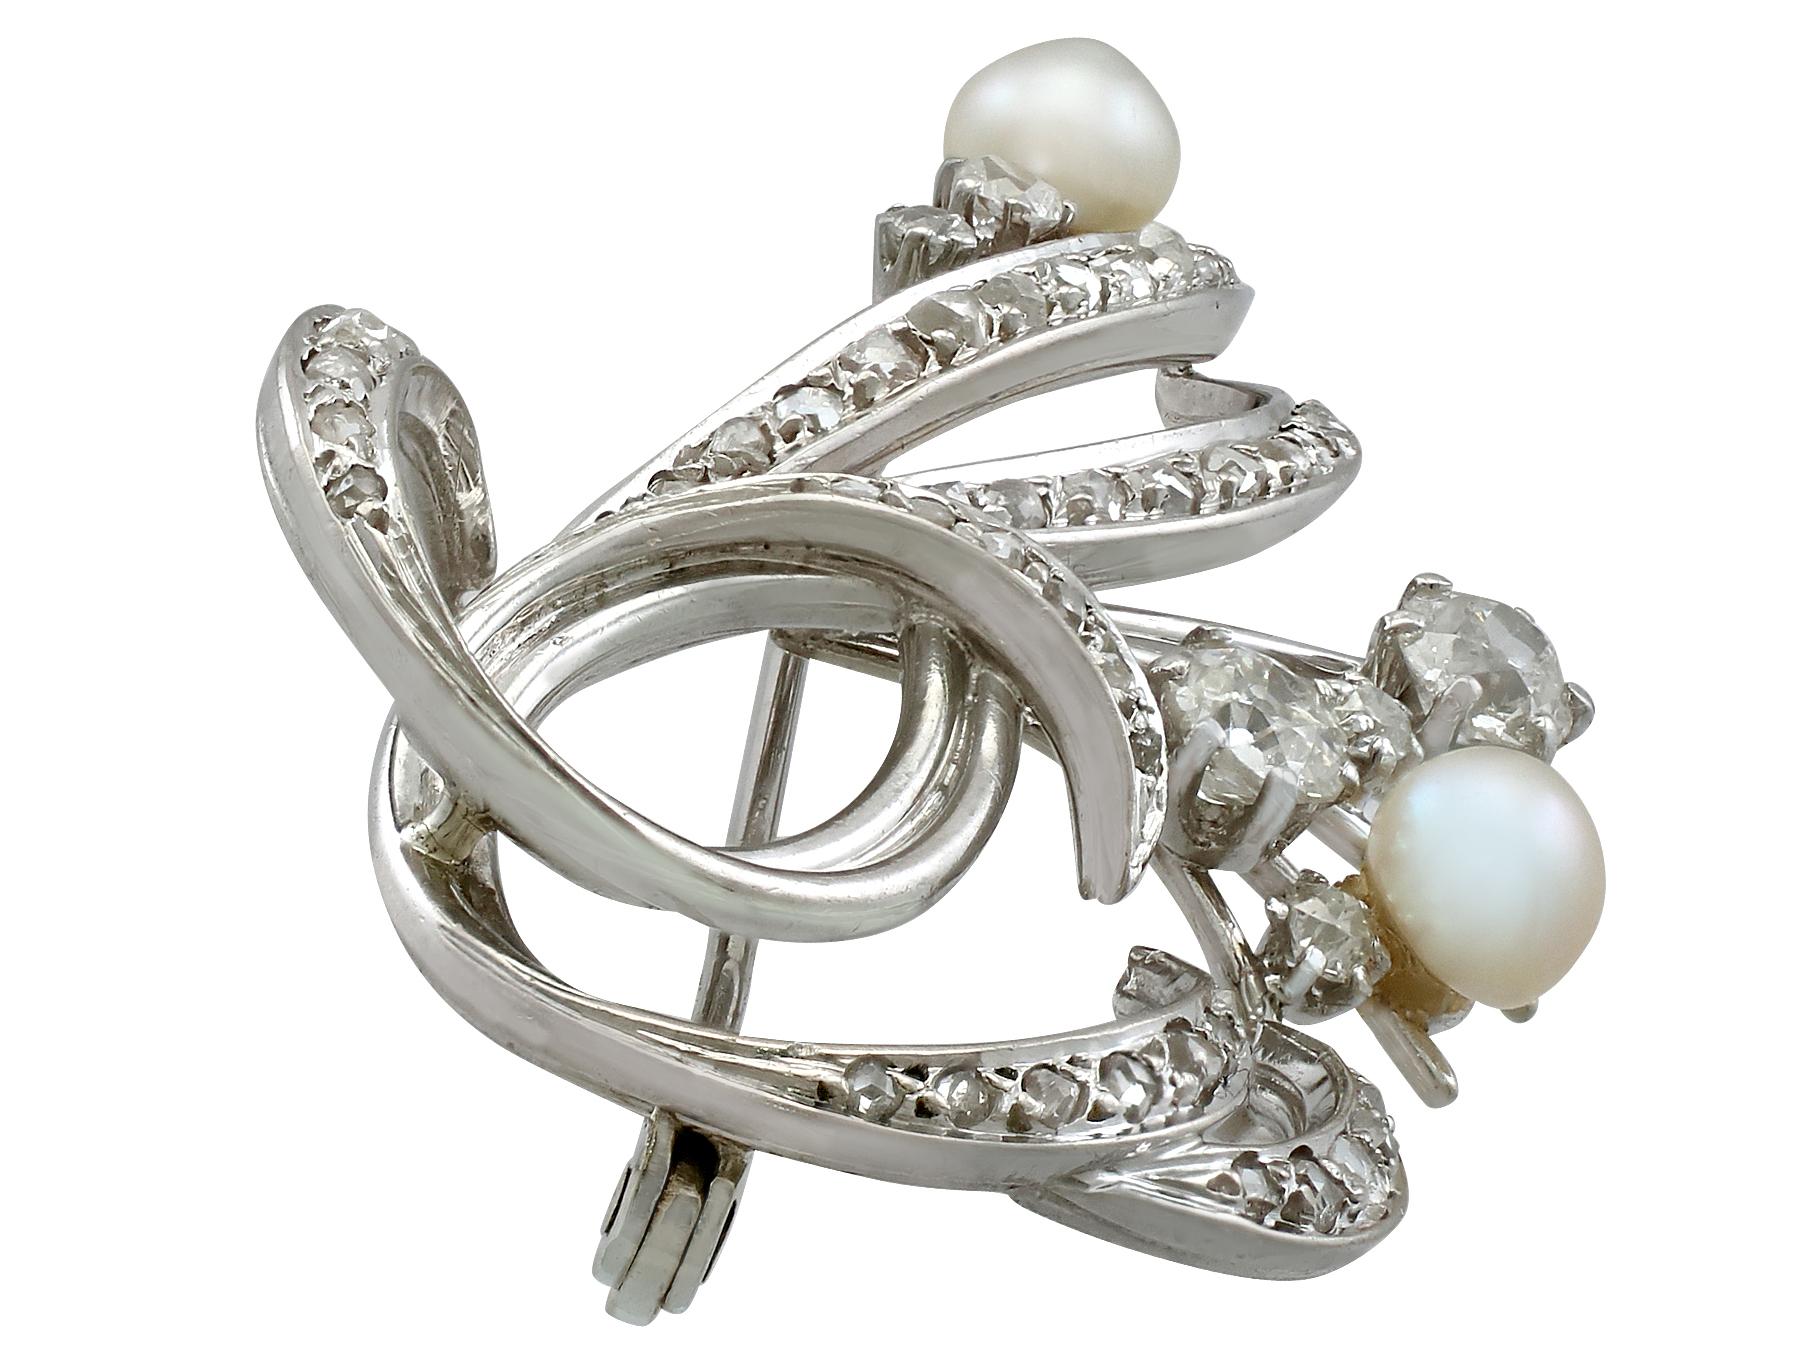 A stunning vintage 1940s 1.10 carat diamond and pearl, 18 karat white gold brooch; part of our diverse vintage estate jewelry collections.

This stunning, fine and impressive vintage pearl and diamond brooch has been crafted in 18k white gold.

The